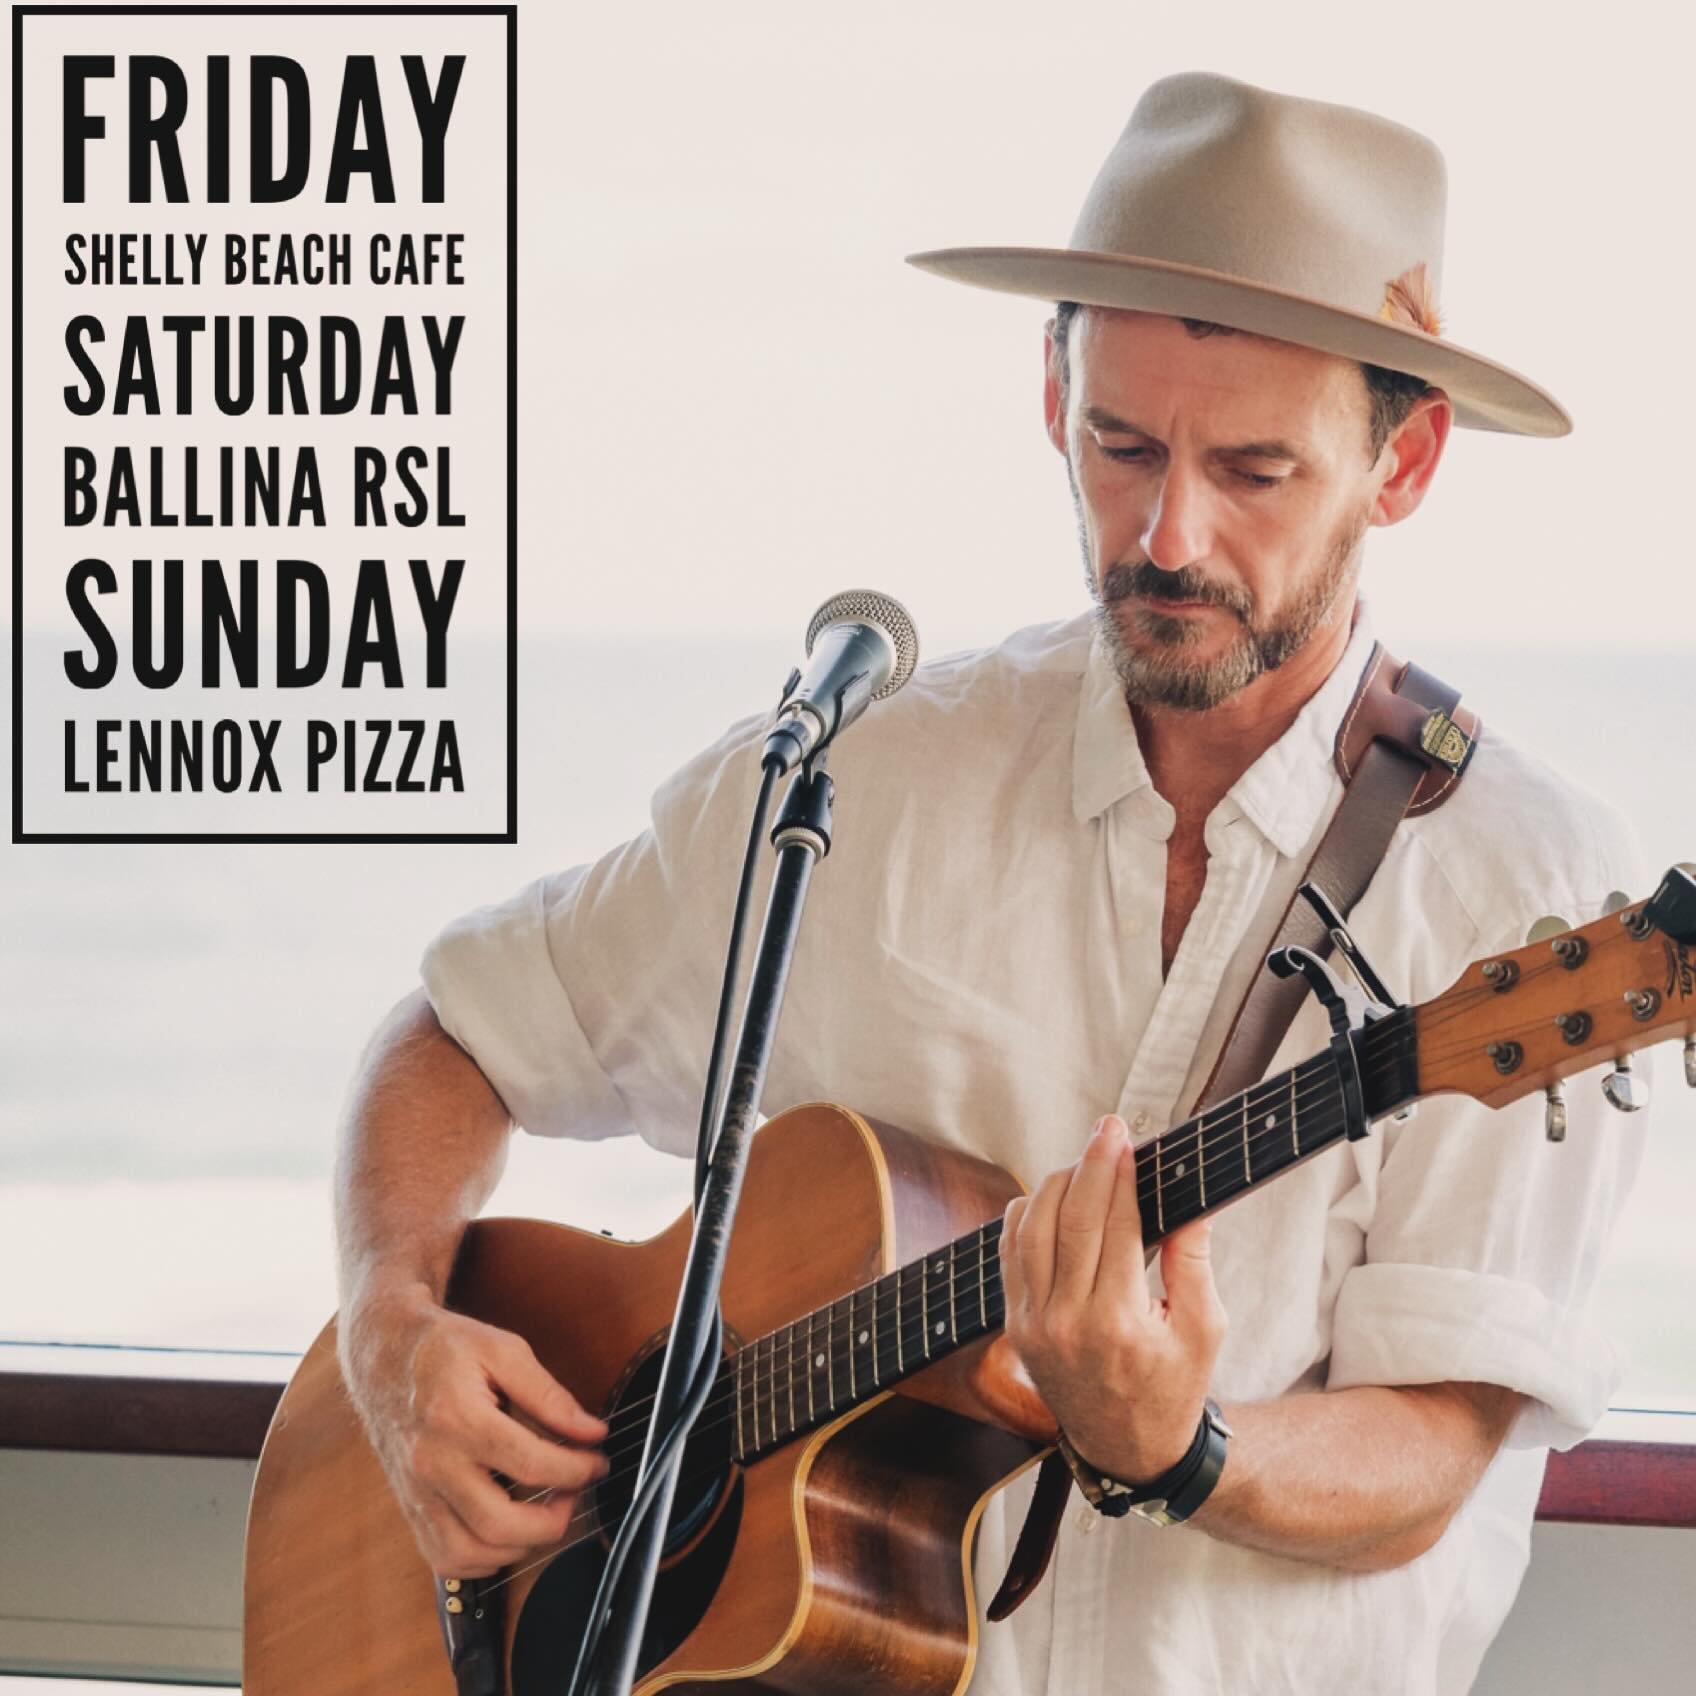 I&rsquo;m looking forward to another busy weekend of music around my beautiful home town #lennoxhead #ballina 🎼✨

Friday at @shellybeachcafe 🏖️
From 5:30pm

Saturday at @ballinarsl 🍻
From 7:00pm

Sunday at @lennoxpizza 🍕
From 4:00pm 

Hope to see